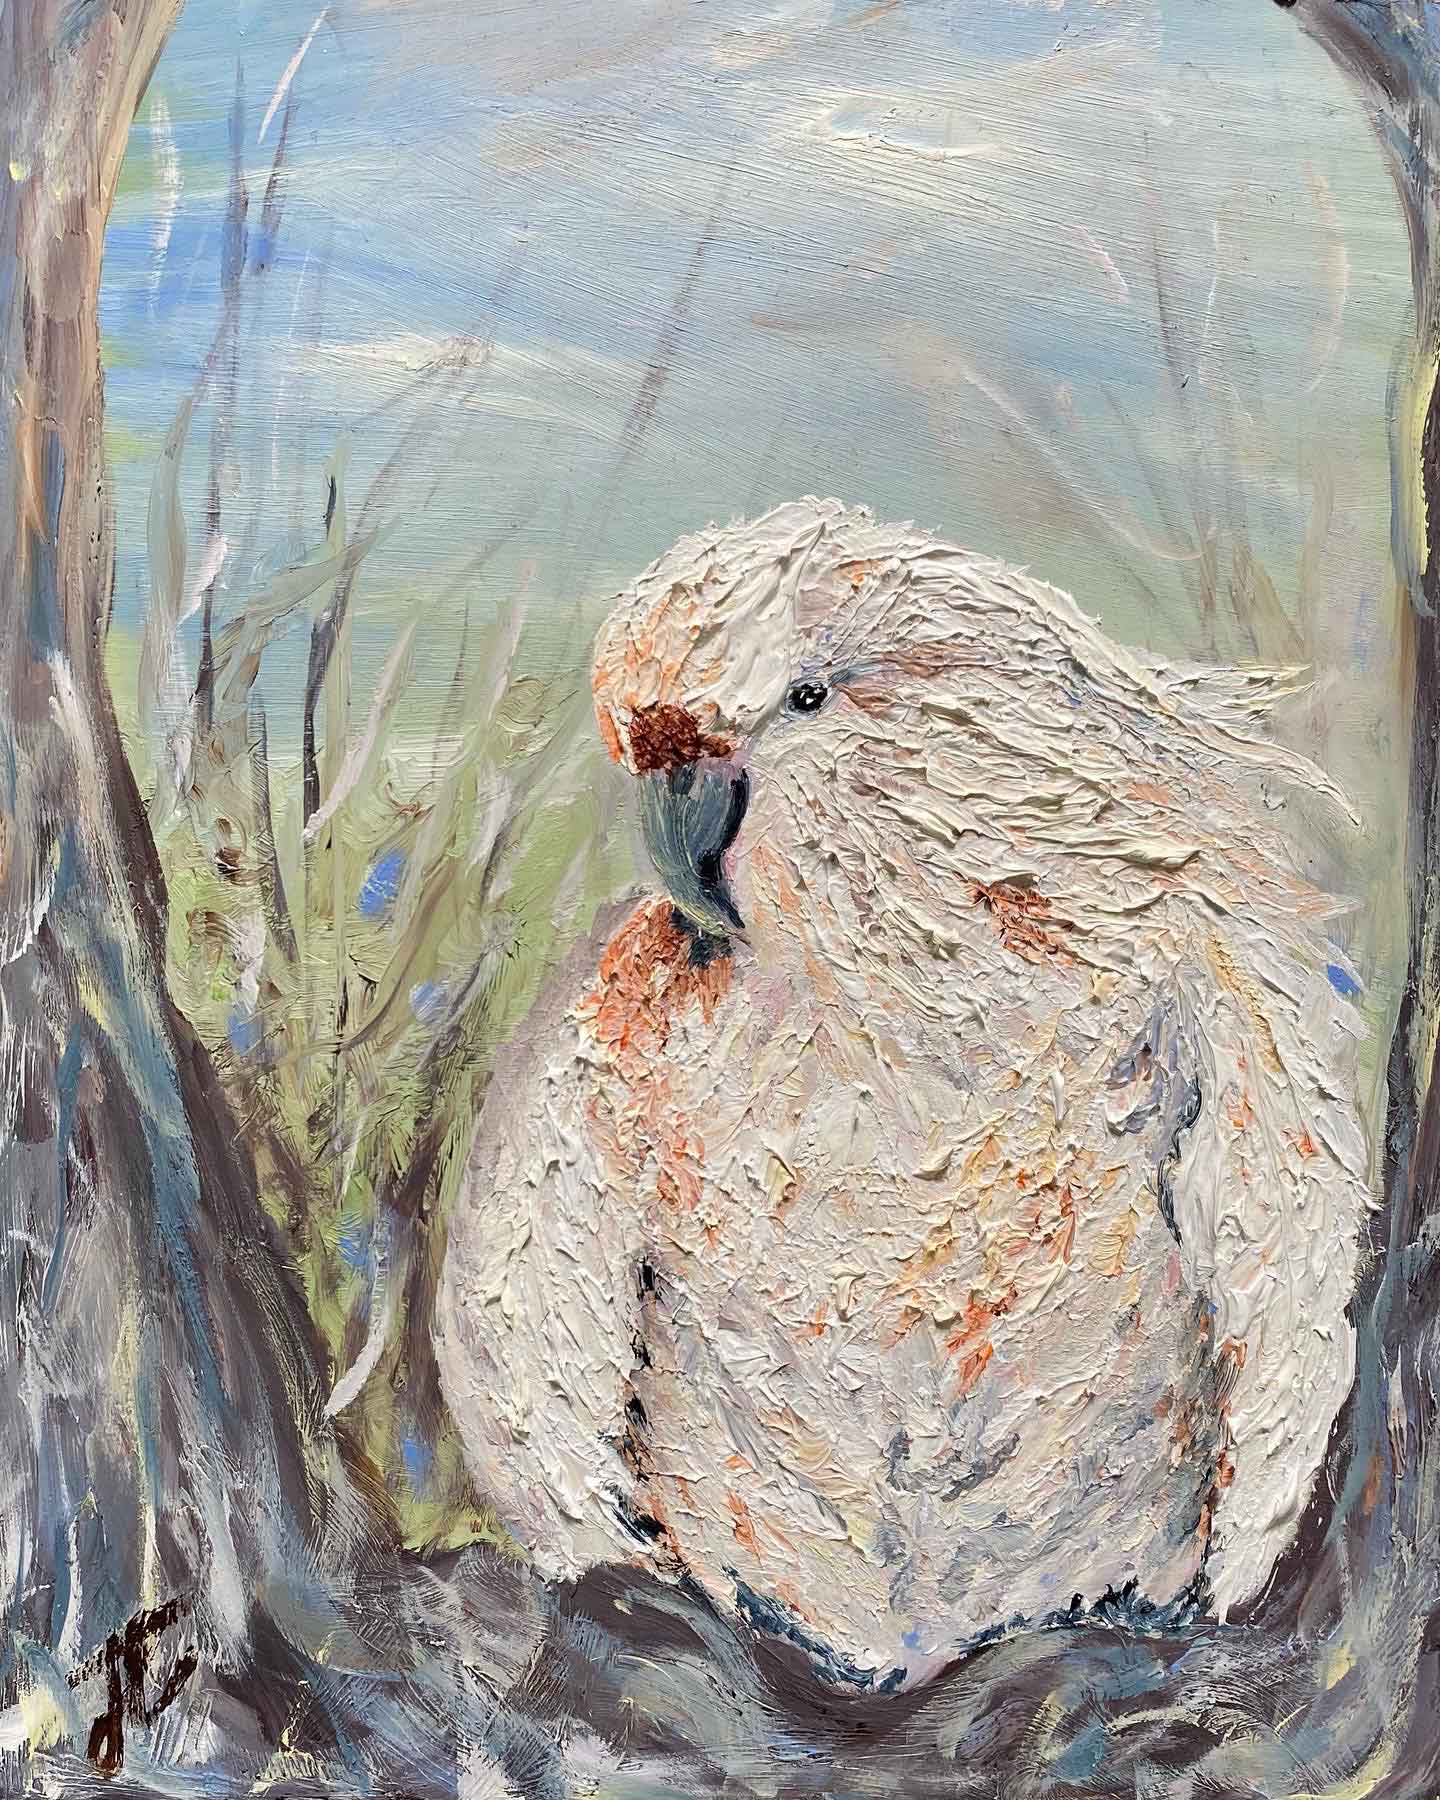 Textured oil painting of cockatoo perched on branch